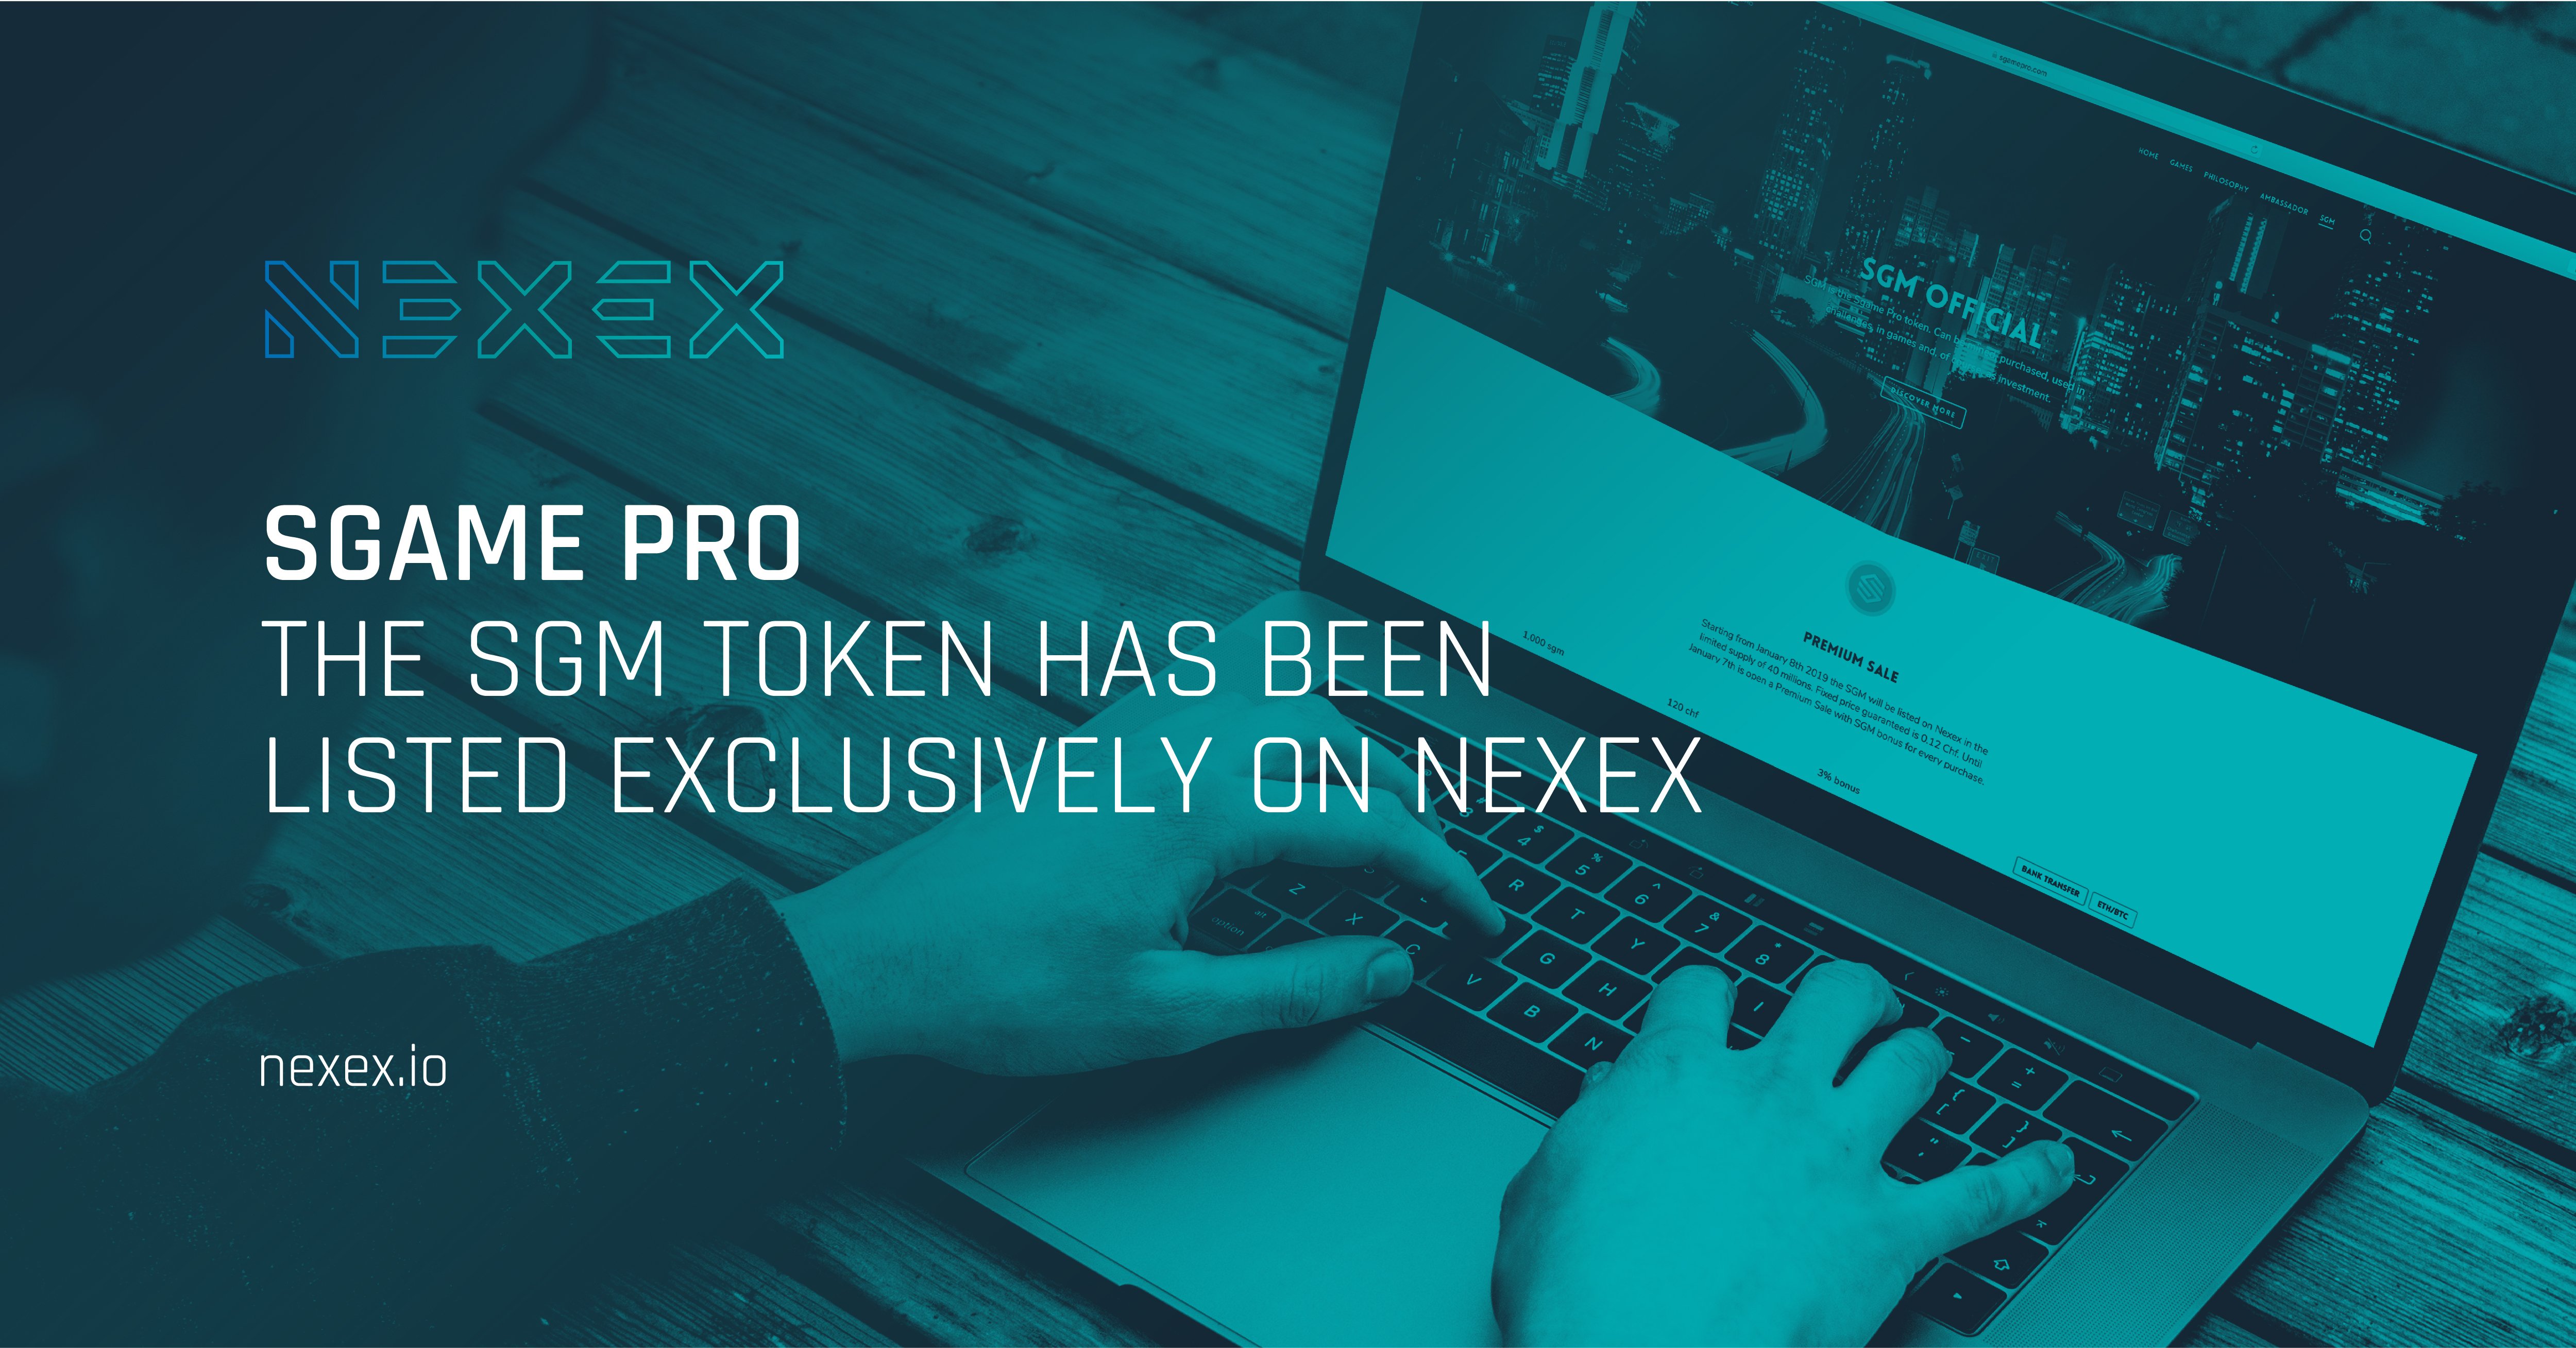 Sgame Pro (SGM) listed today on the Nexex exchange